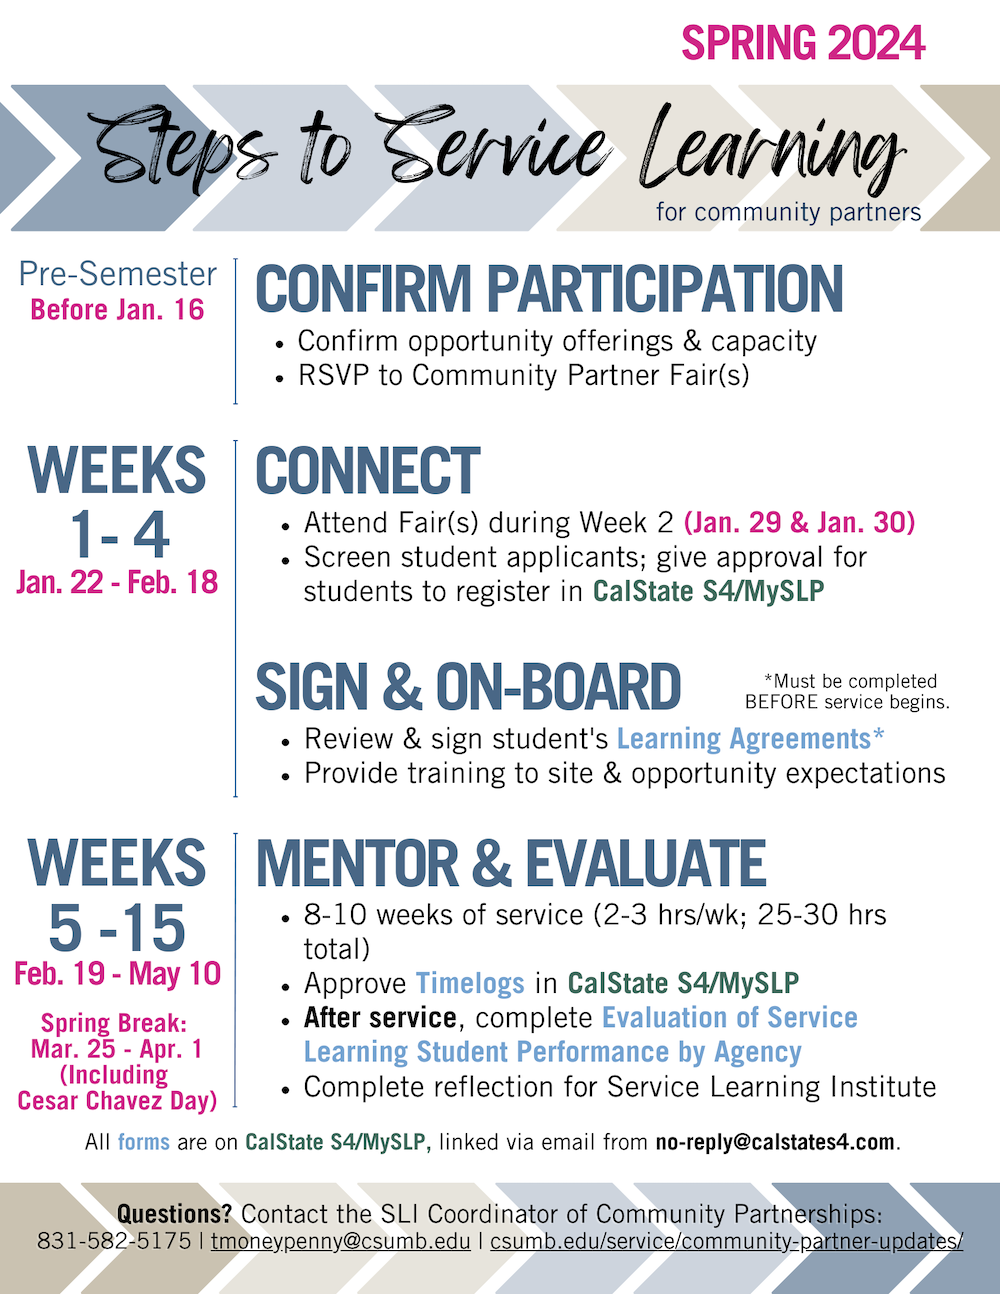 Spring 2024 dates and activities for service learning partner organizations